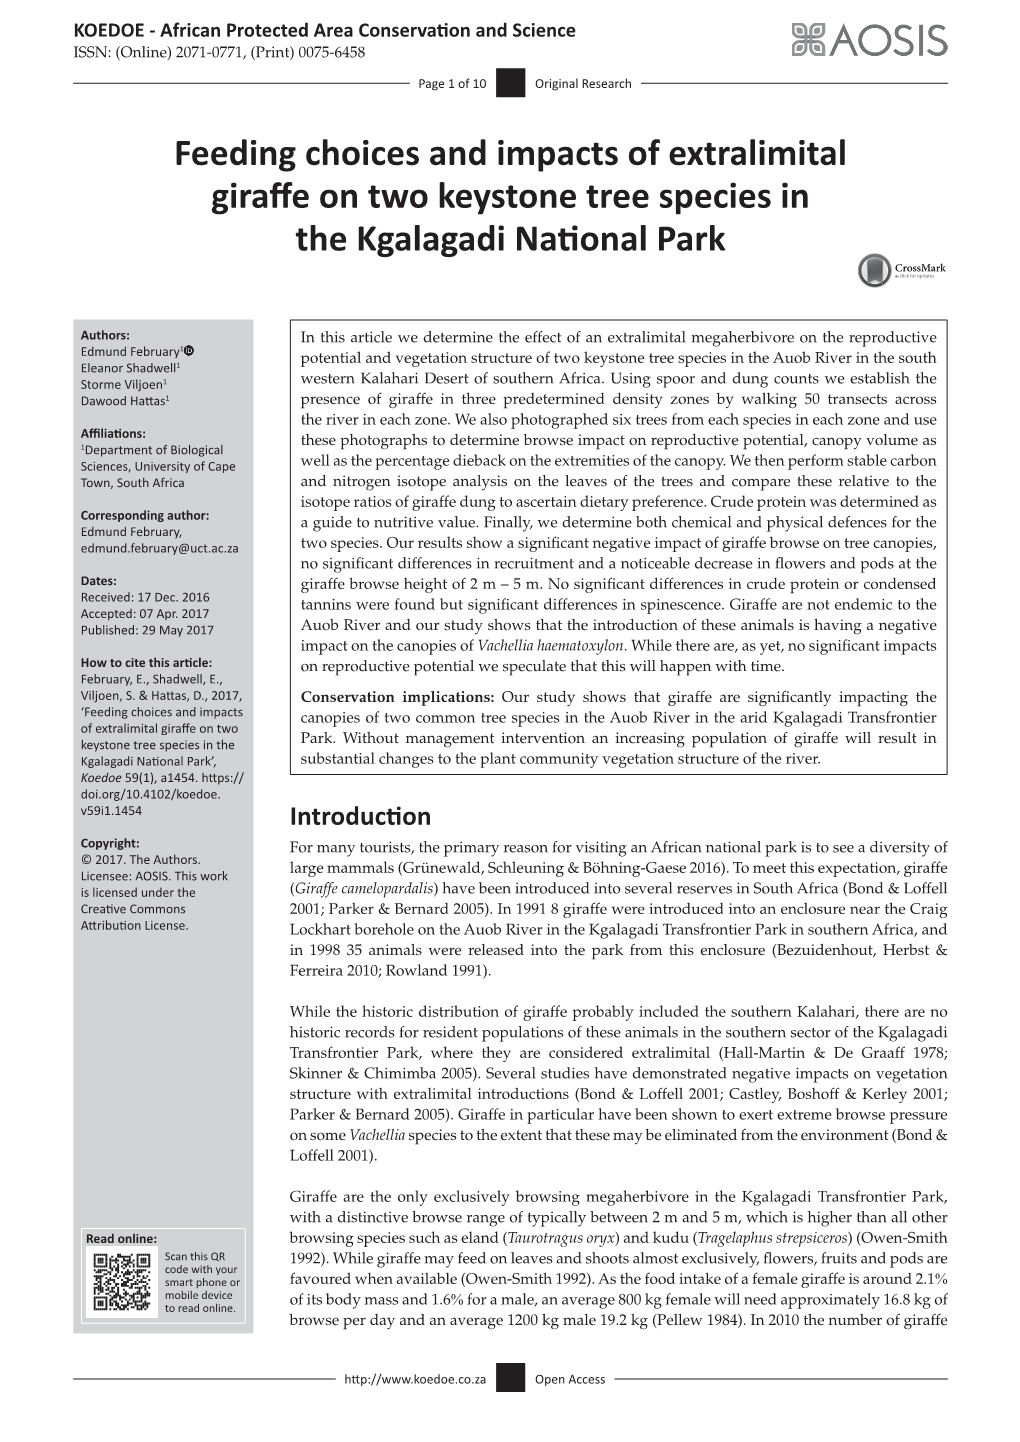 Feeding Choices and Impacts of Extralimital Giraffe on Two Keystone Tree Species in the Kgalagadi National Park